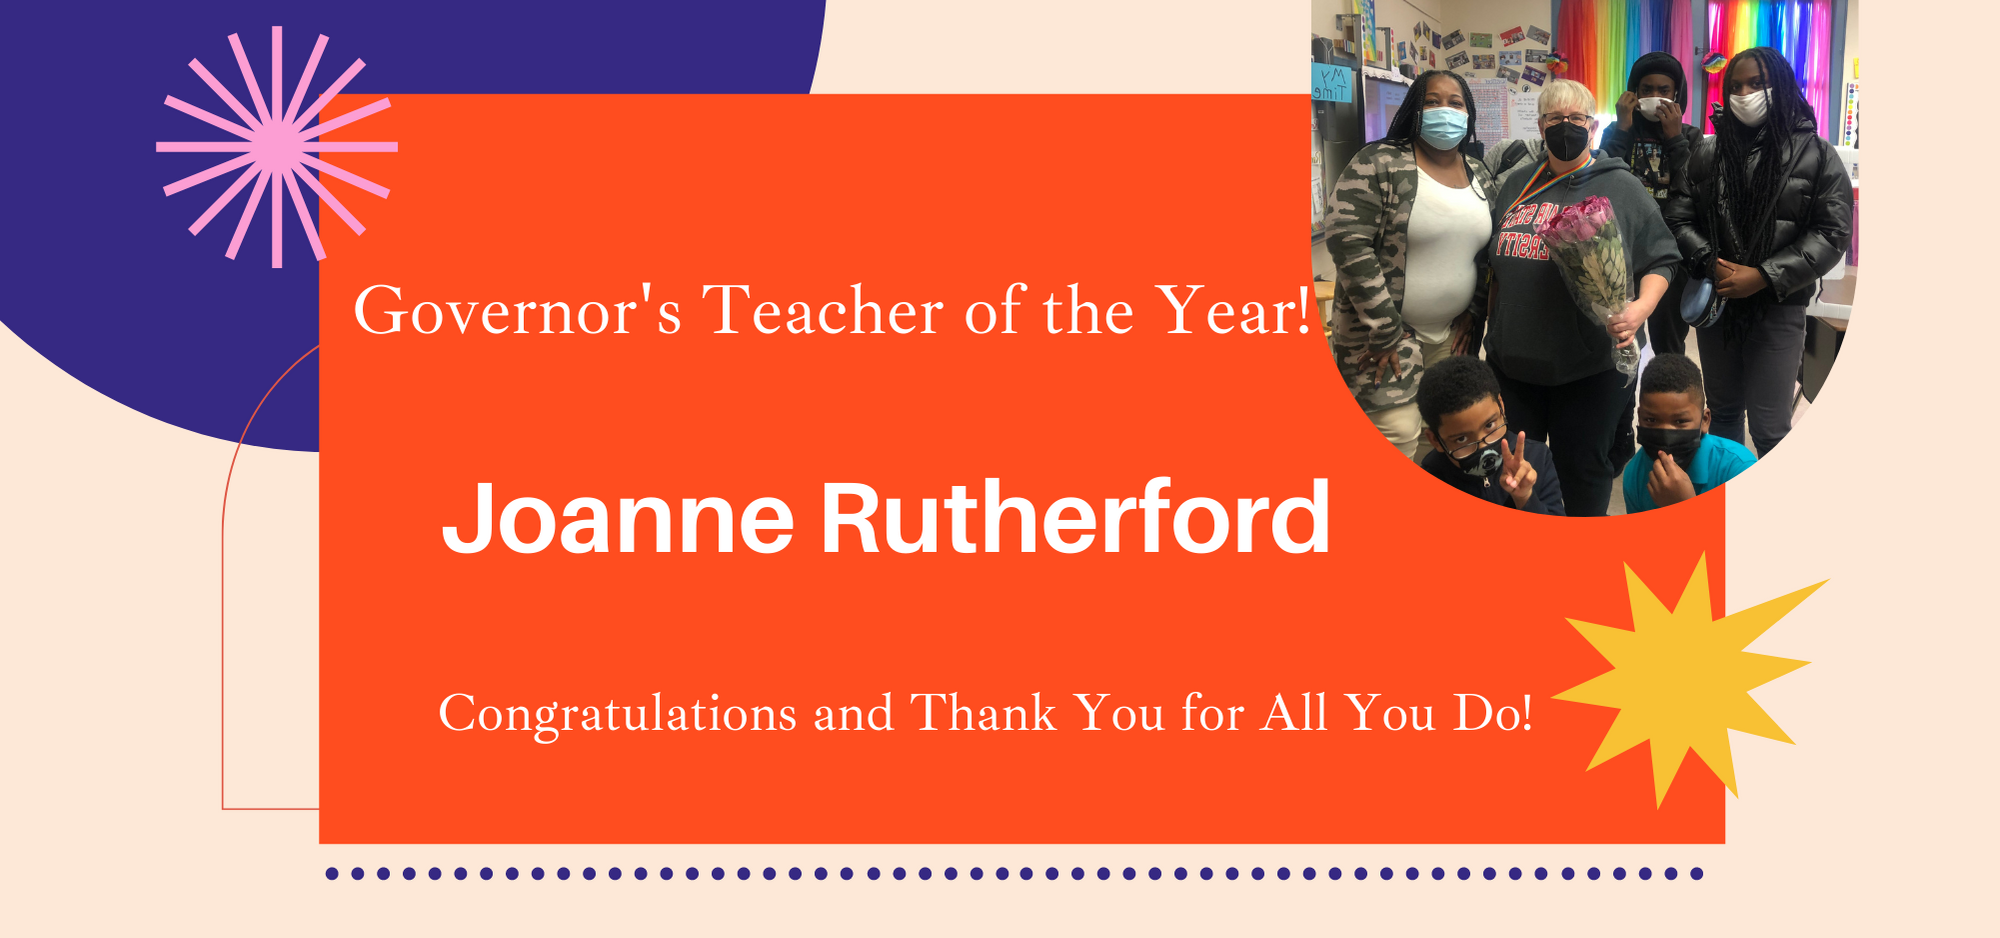 Governor’s Teacher of the Year!